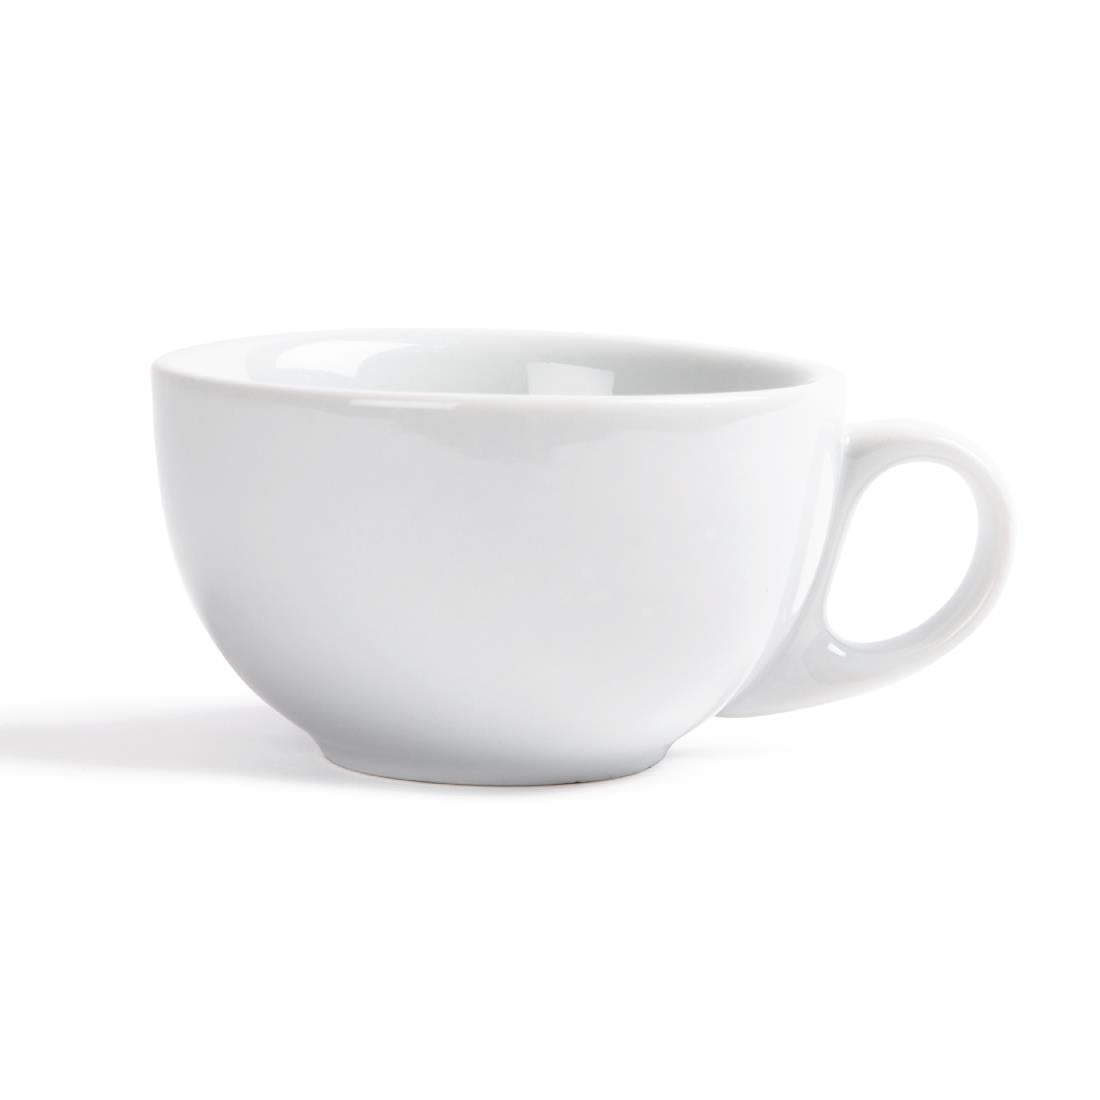 GG870 Athena Hotelware Cappuccino Cups 10oz 285ml (Pack of 12) JD Catering Equipment Solutions Ltd